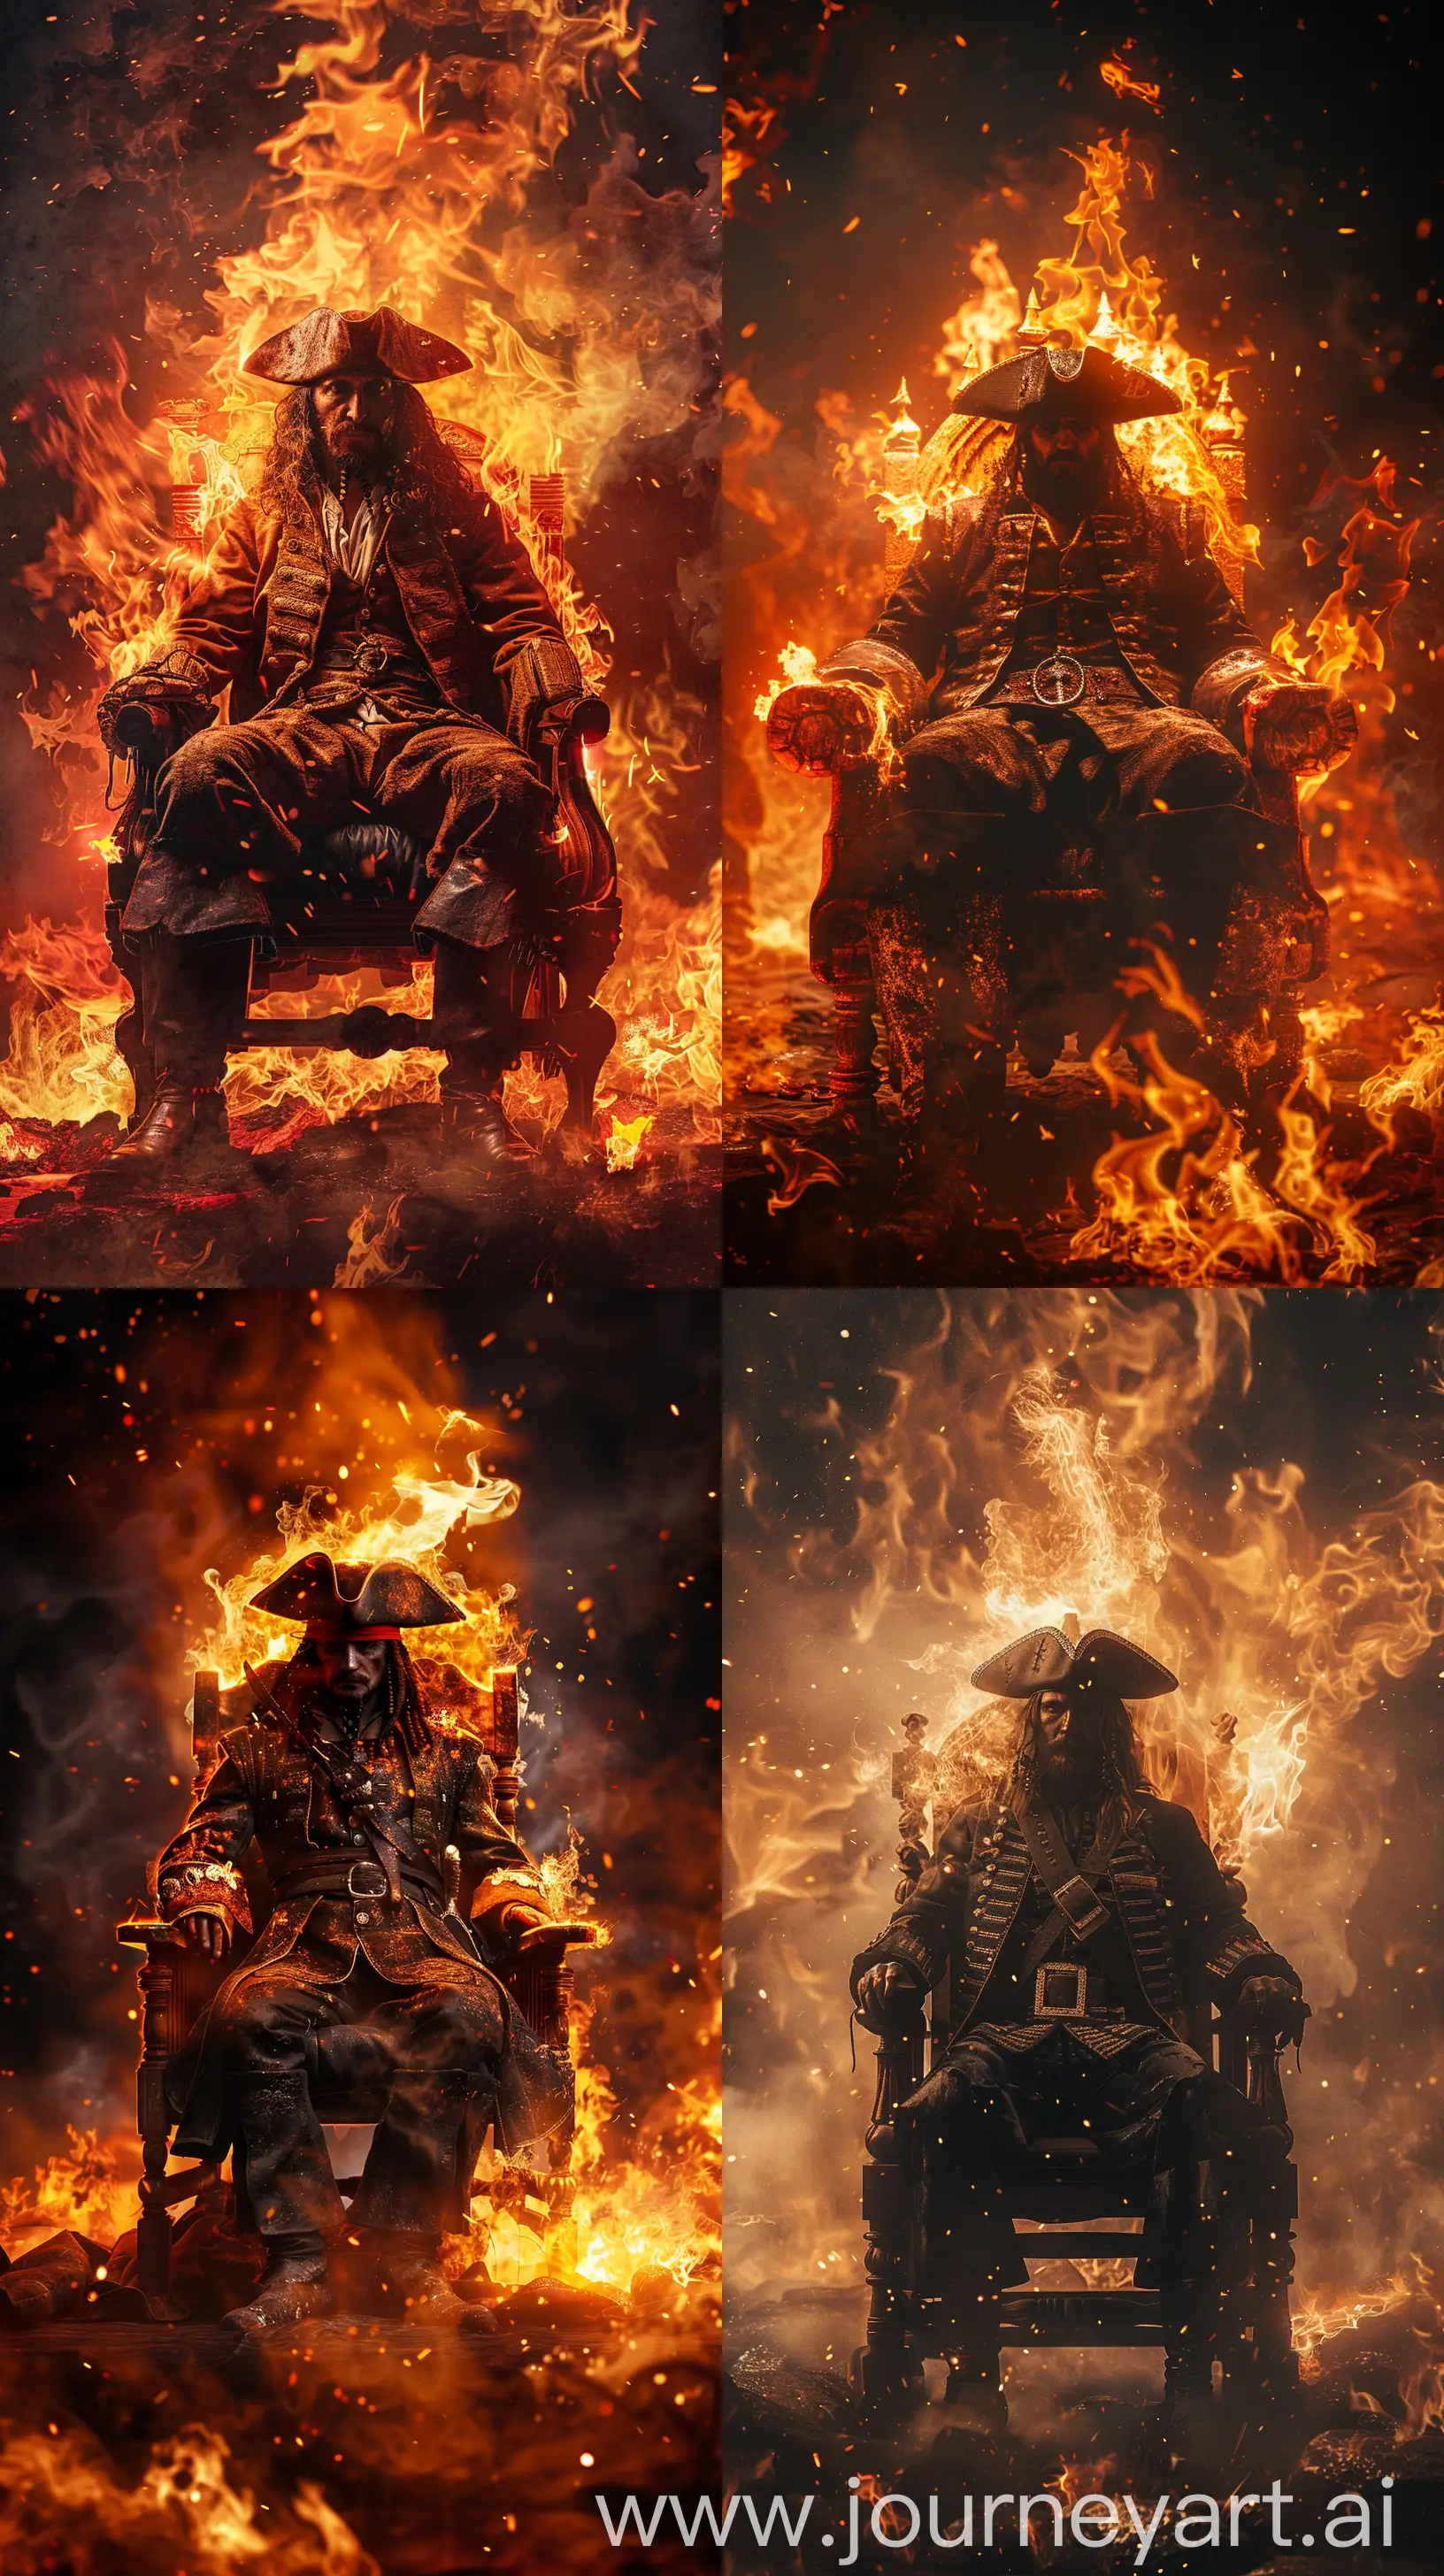 Pirate-King-Surrounded-by-Flames-on-Throne-Epic-Cinematic-Scene